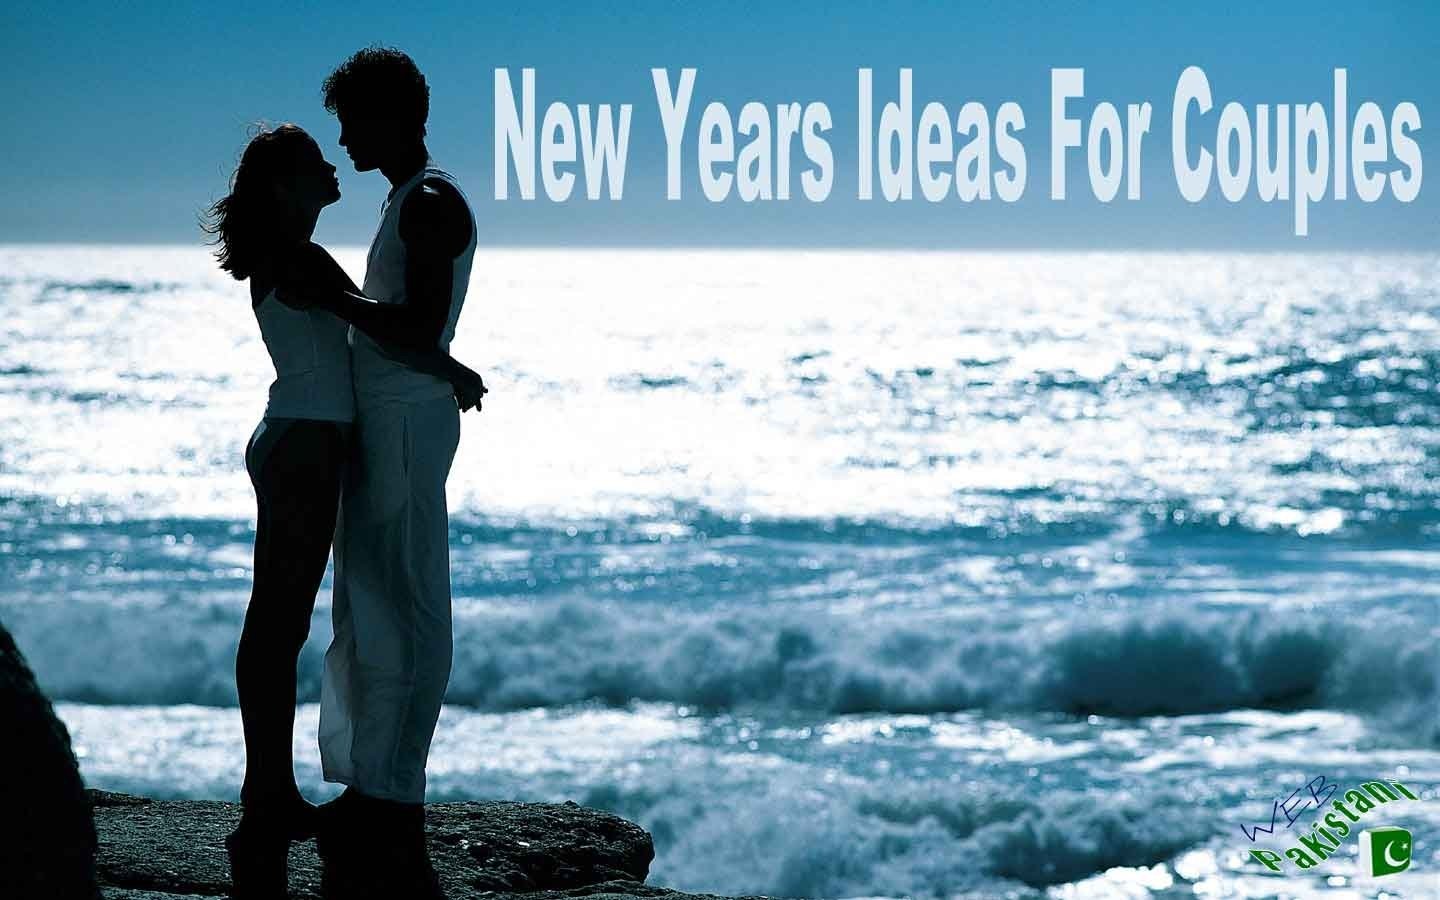 10 Trendy New Years Ideas For Couples new year ideas for couples photograph new years 2013 ideas 2023